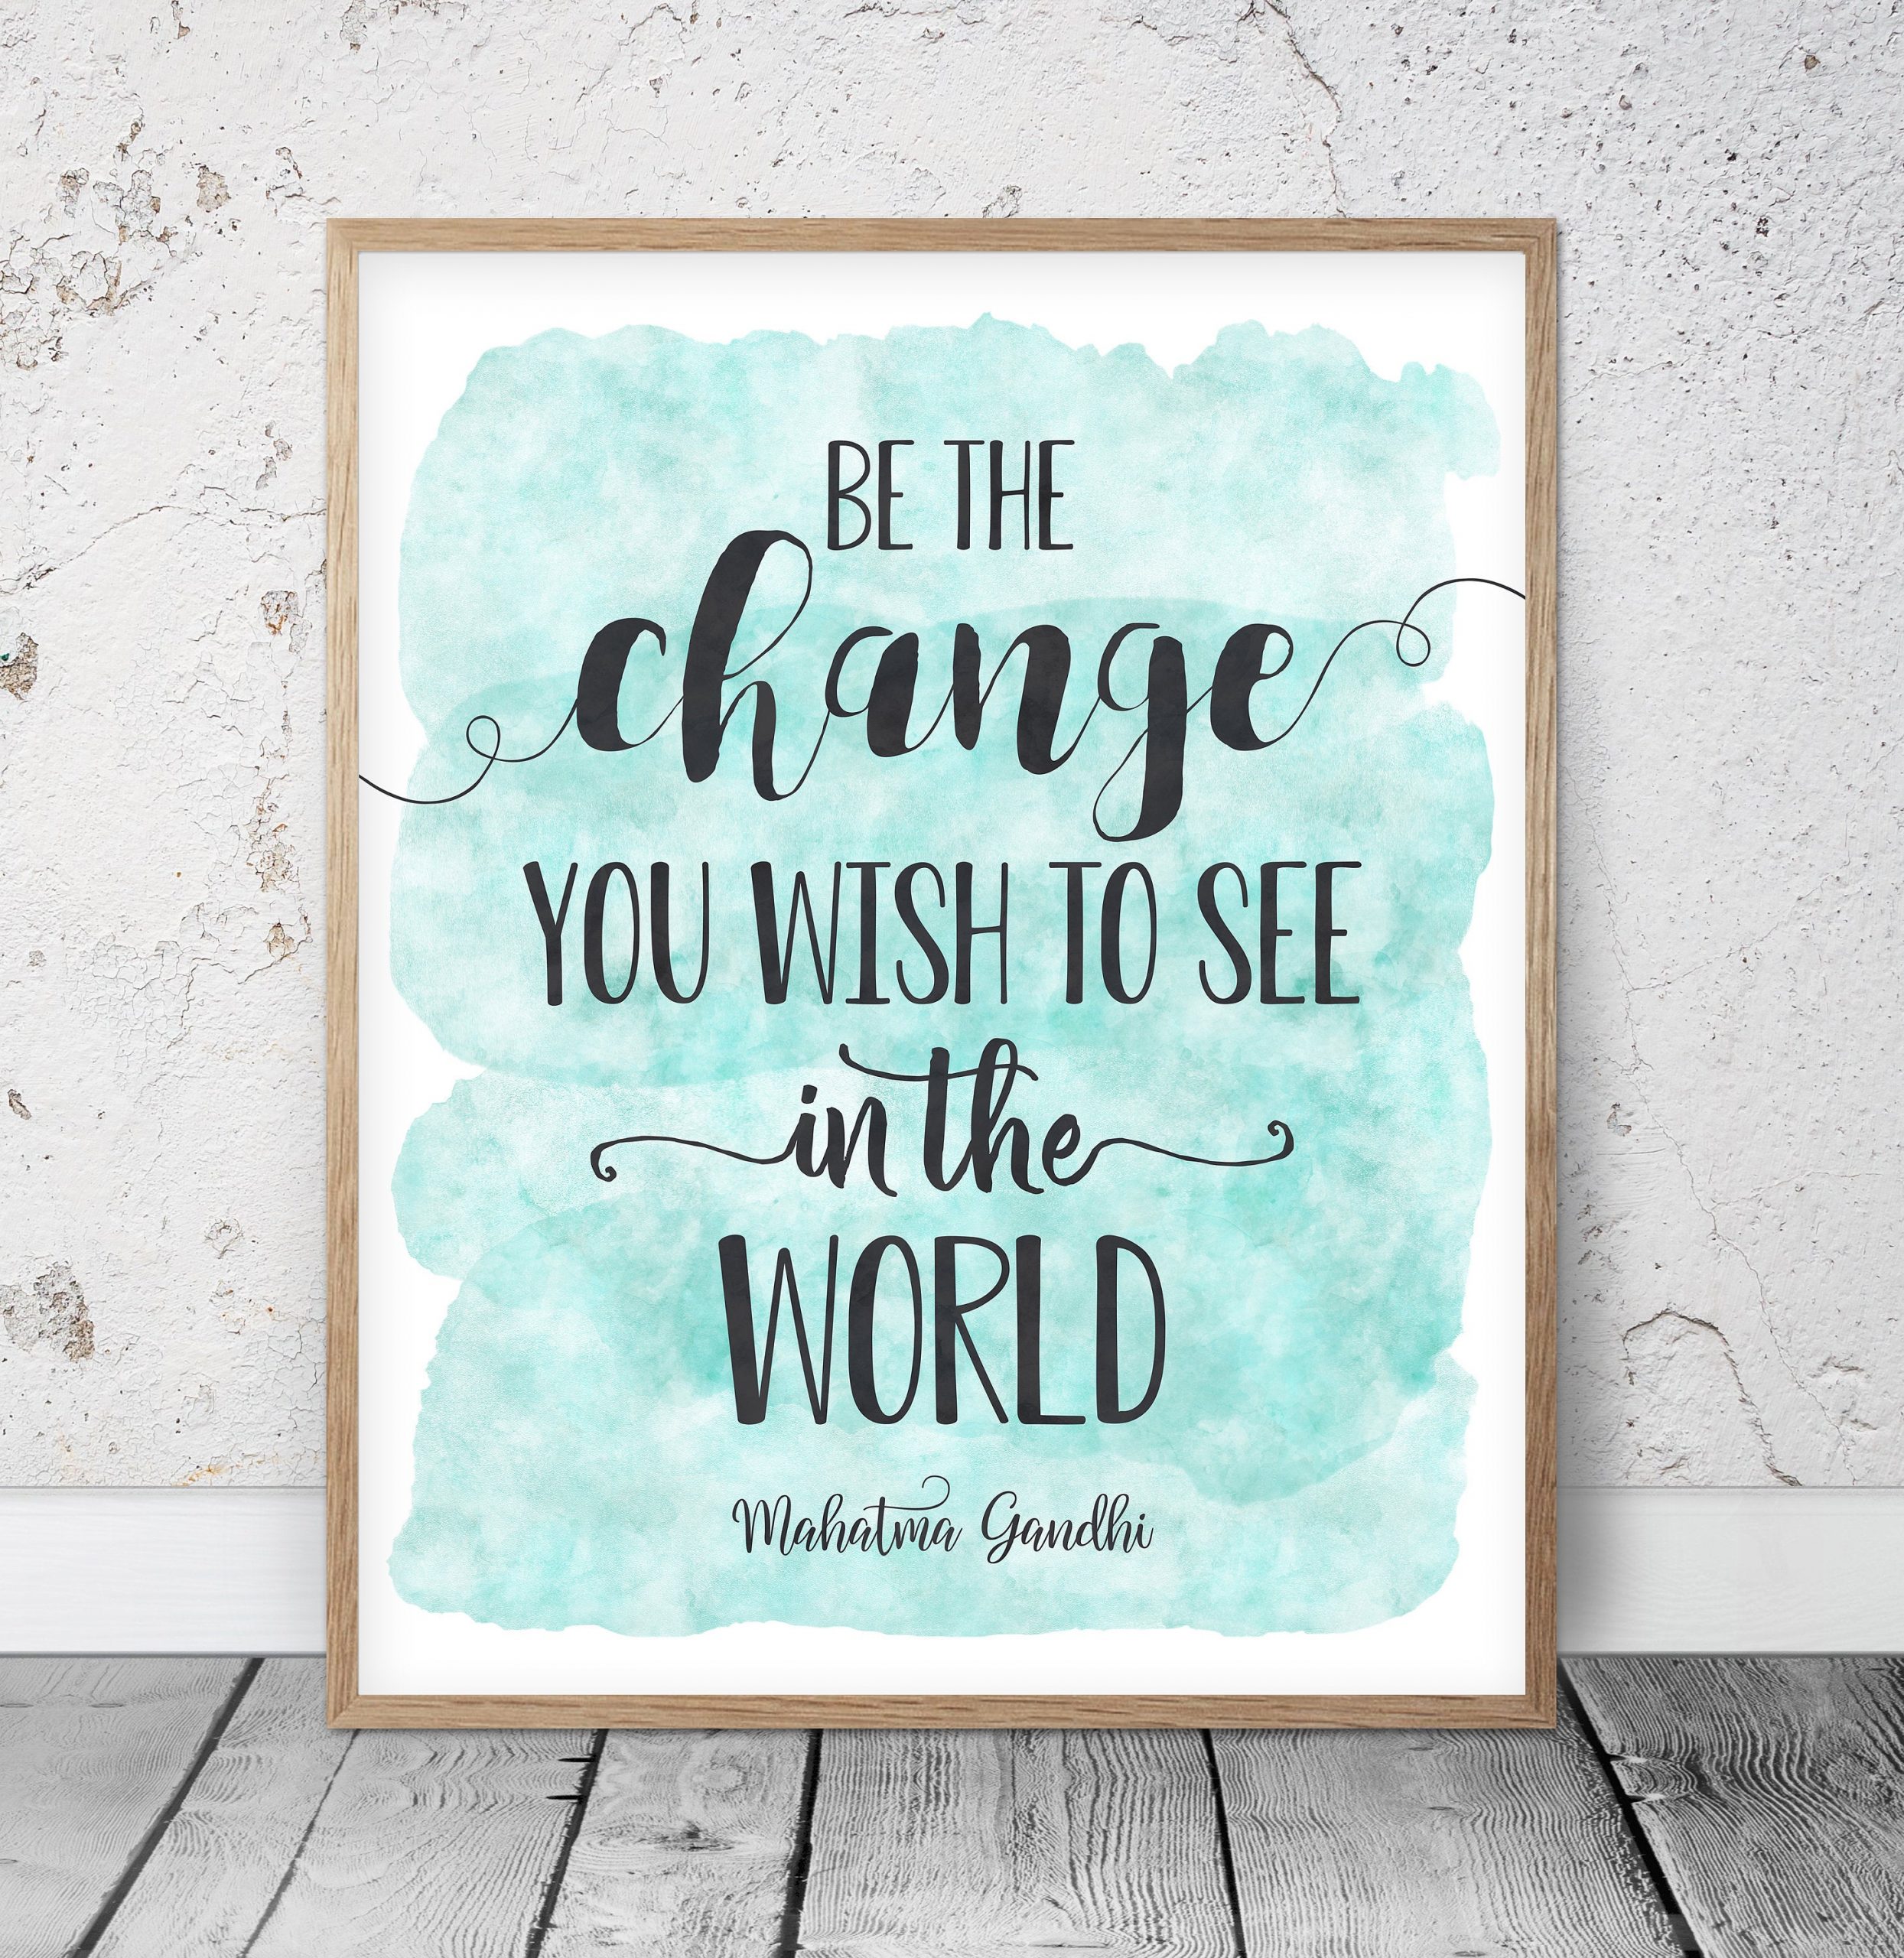 Be The Change You Wish To See In The World, Mahatma Gandhi Quotes Wall Art